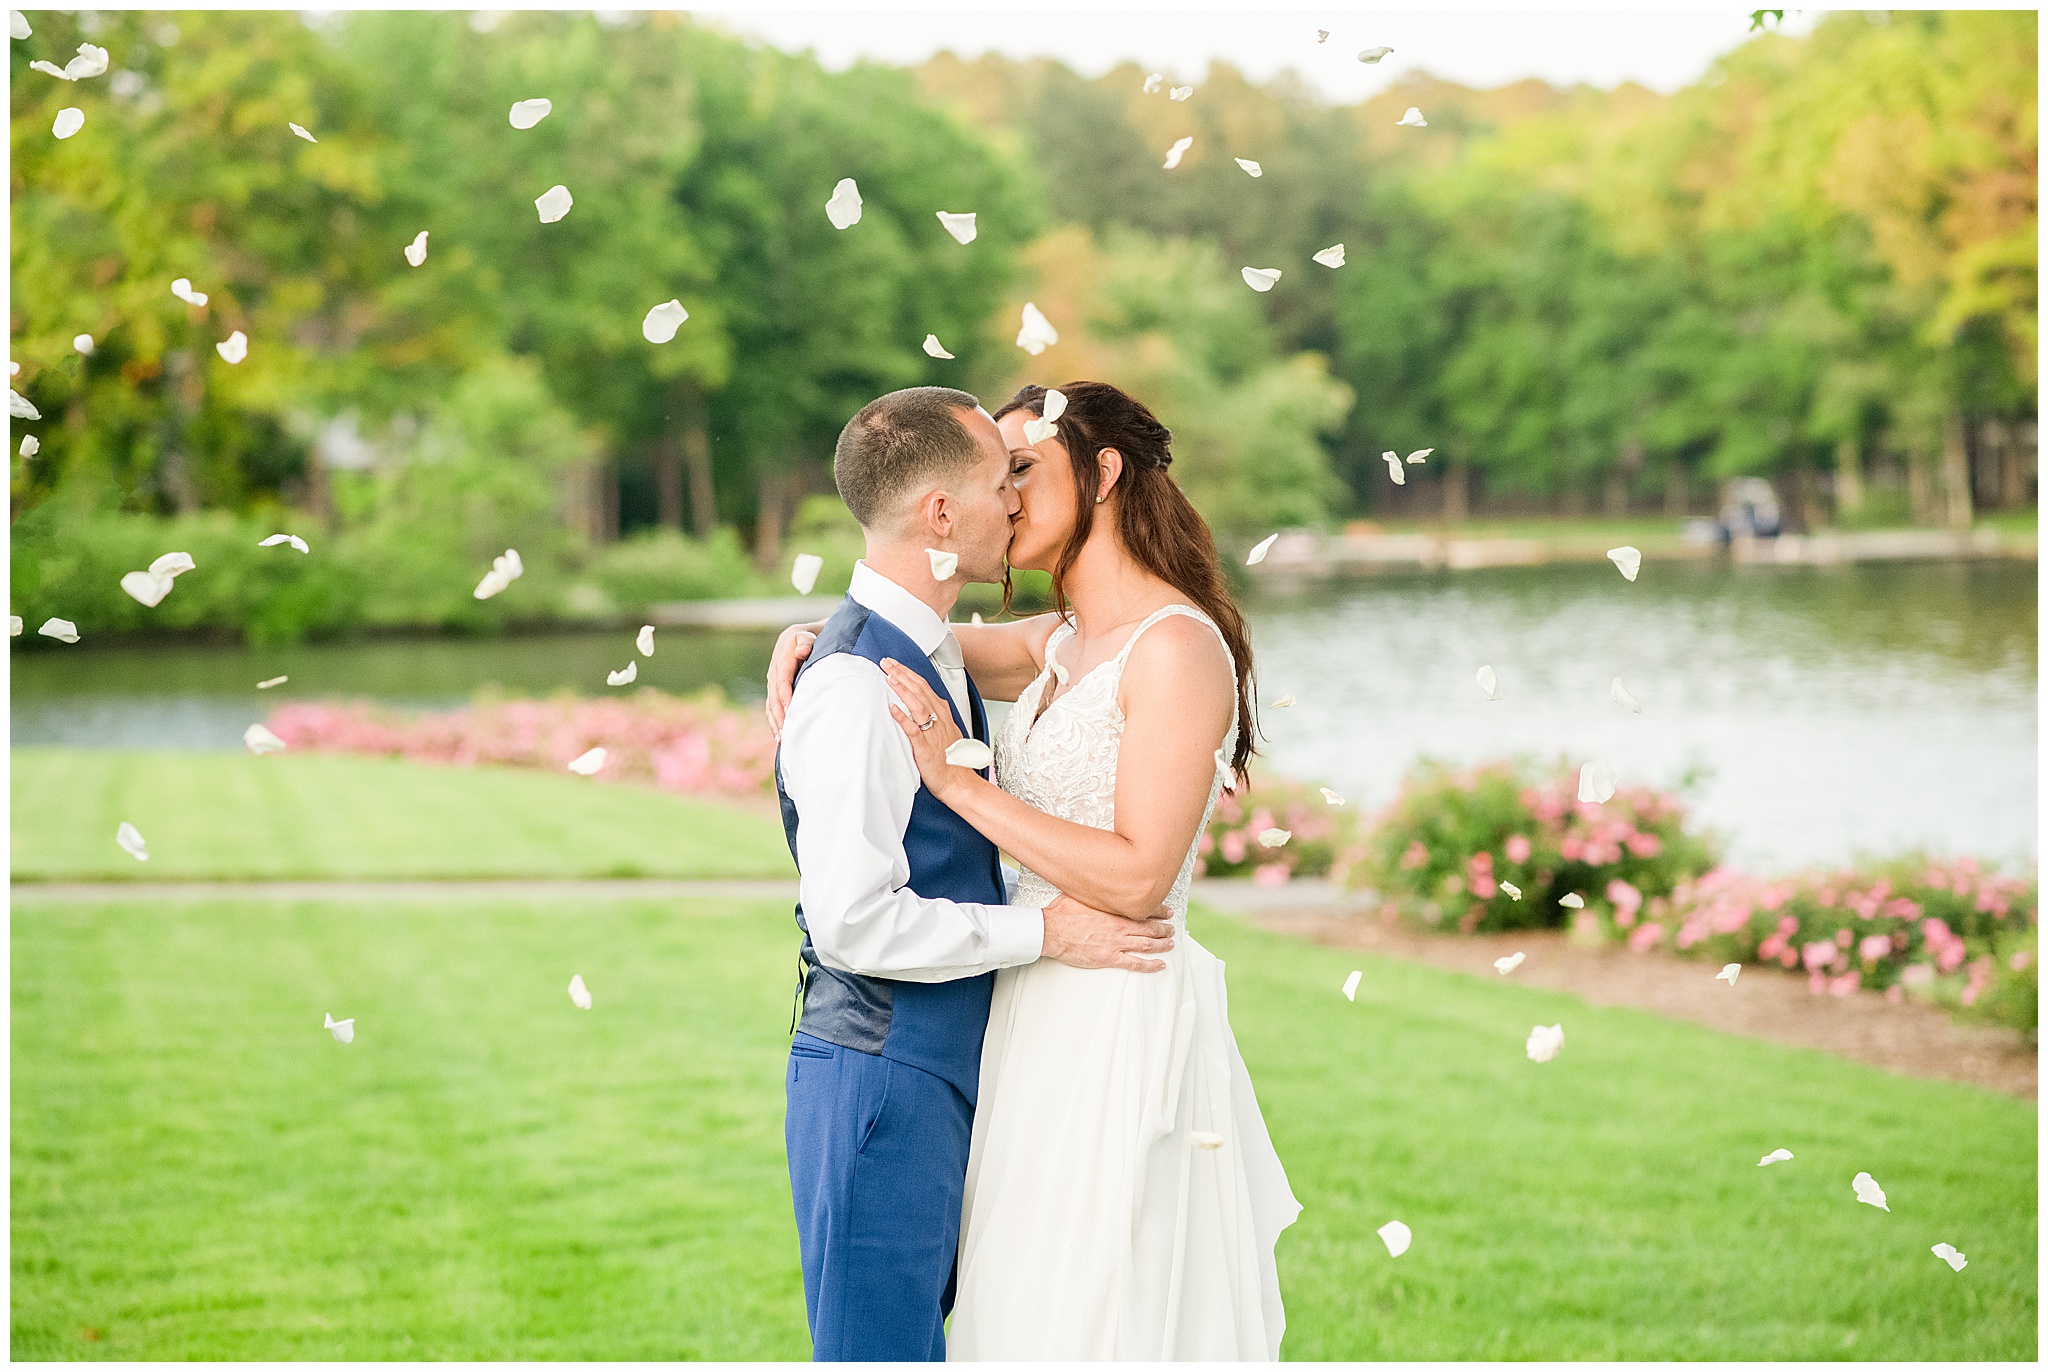 Newlyweds kiss in a manicured lawn by a lake while white flower petals rain down around them Wedding Venues in Virginia